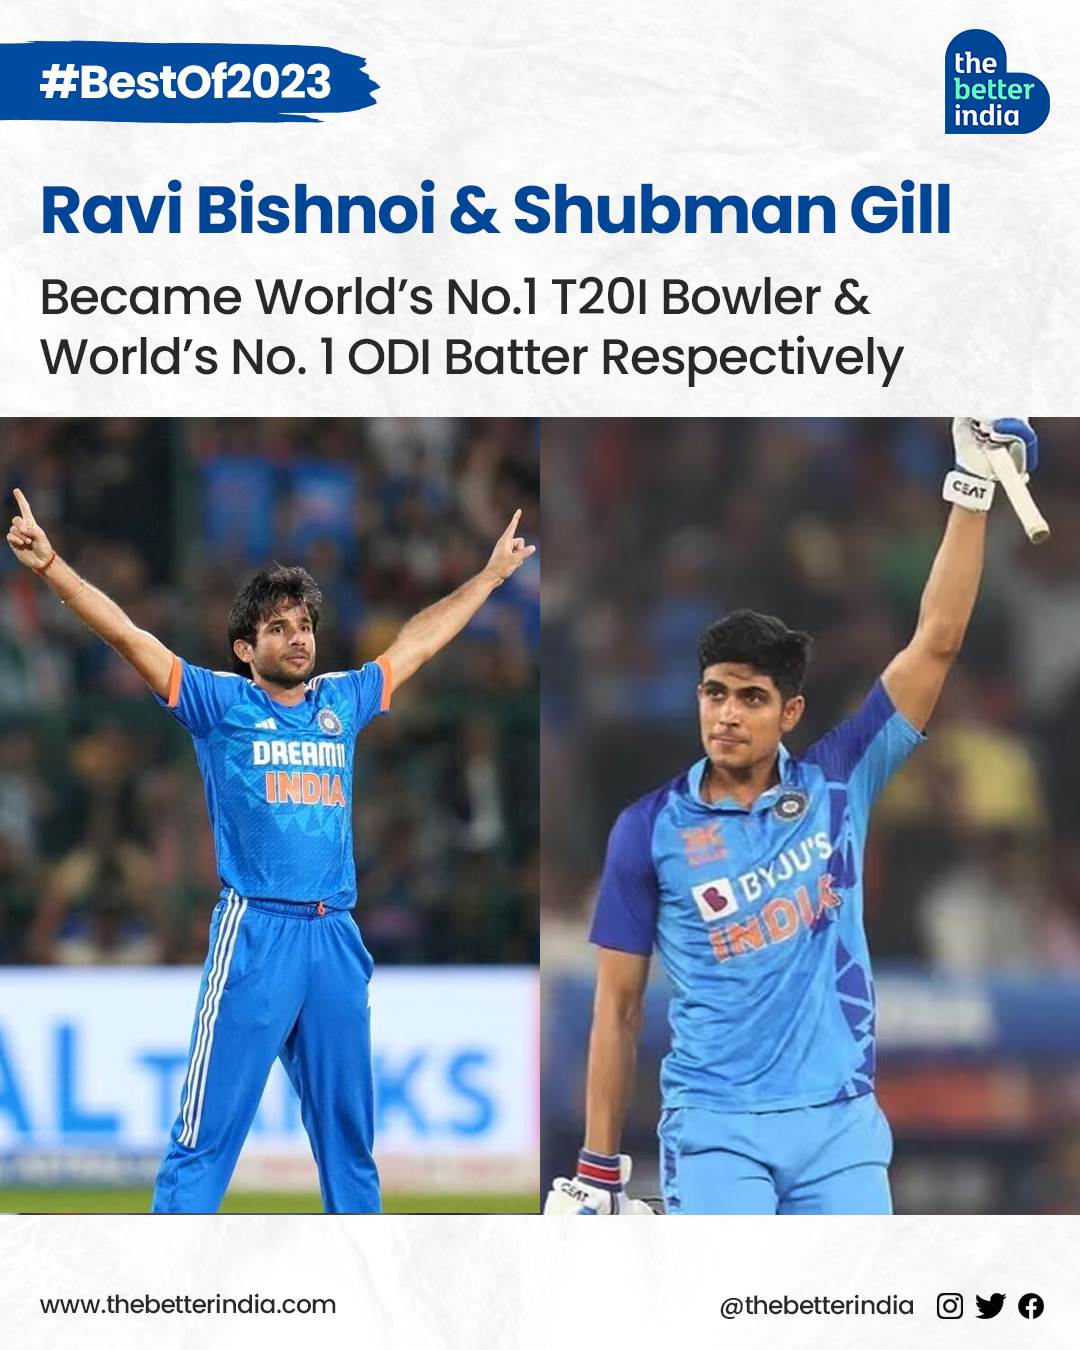 Ravi Bishnoi and Shubman Gill are known for their phenomenal performance in cricket